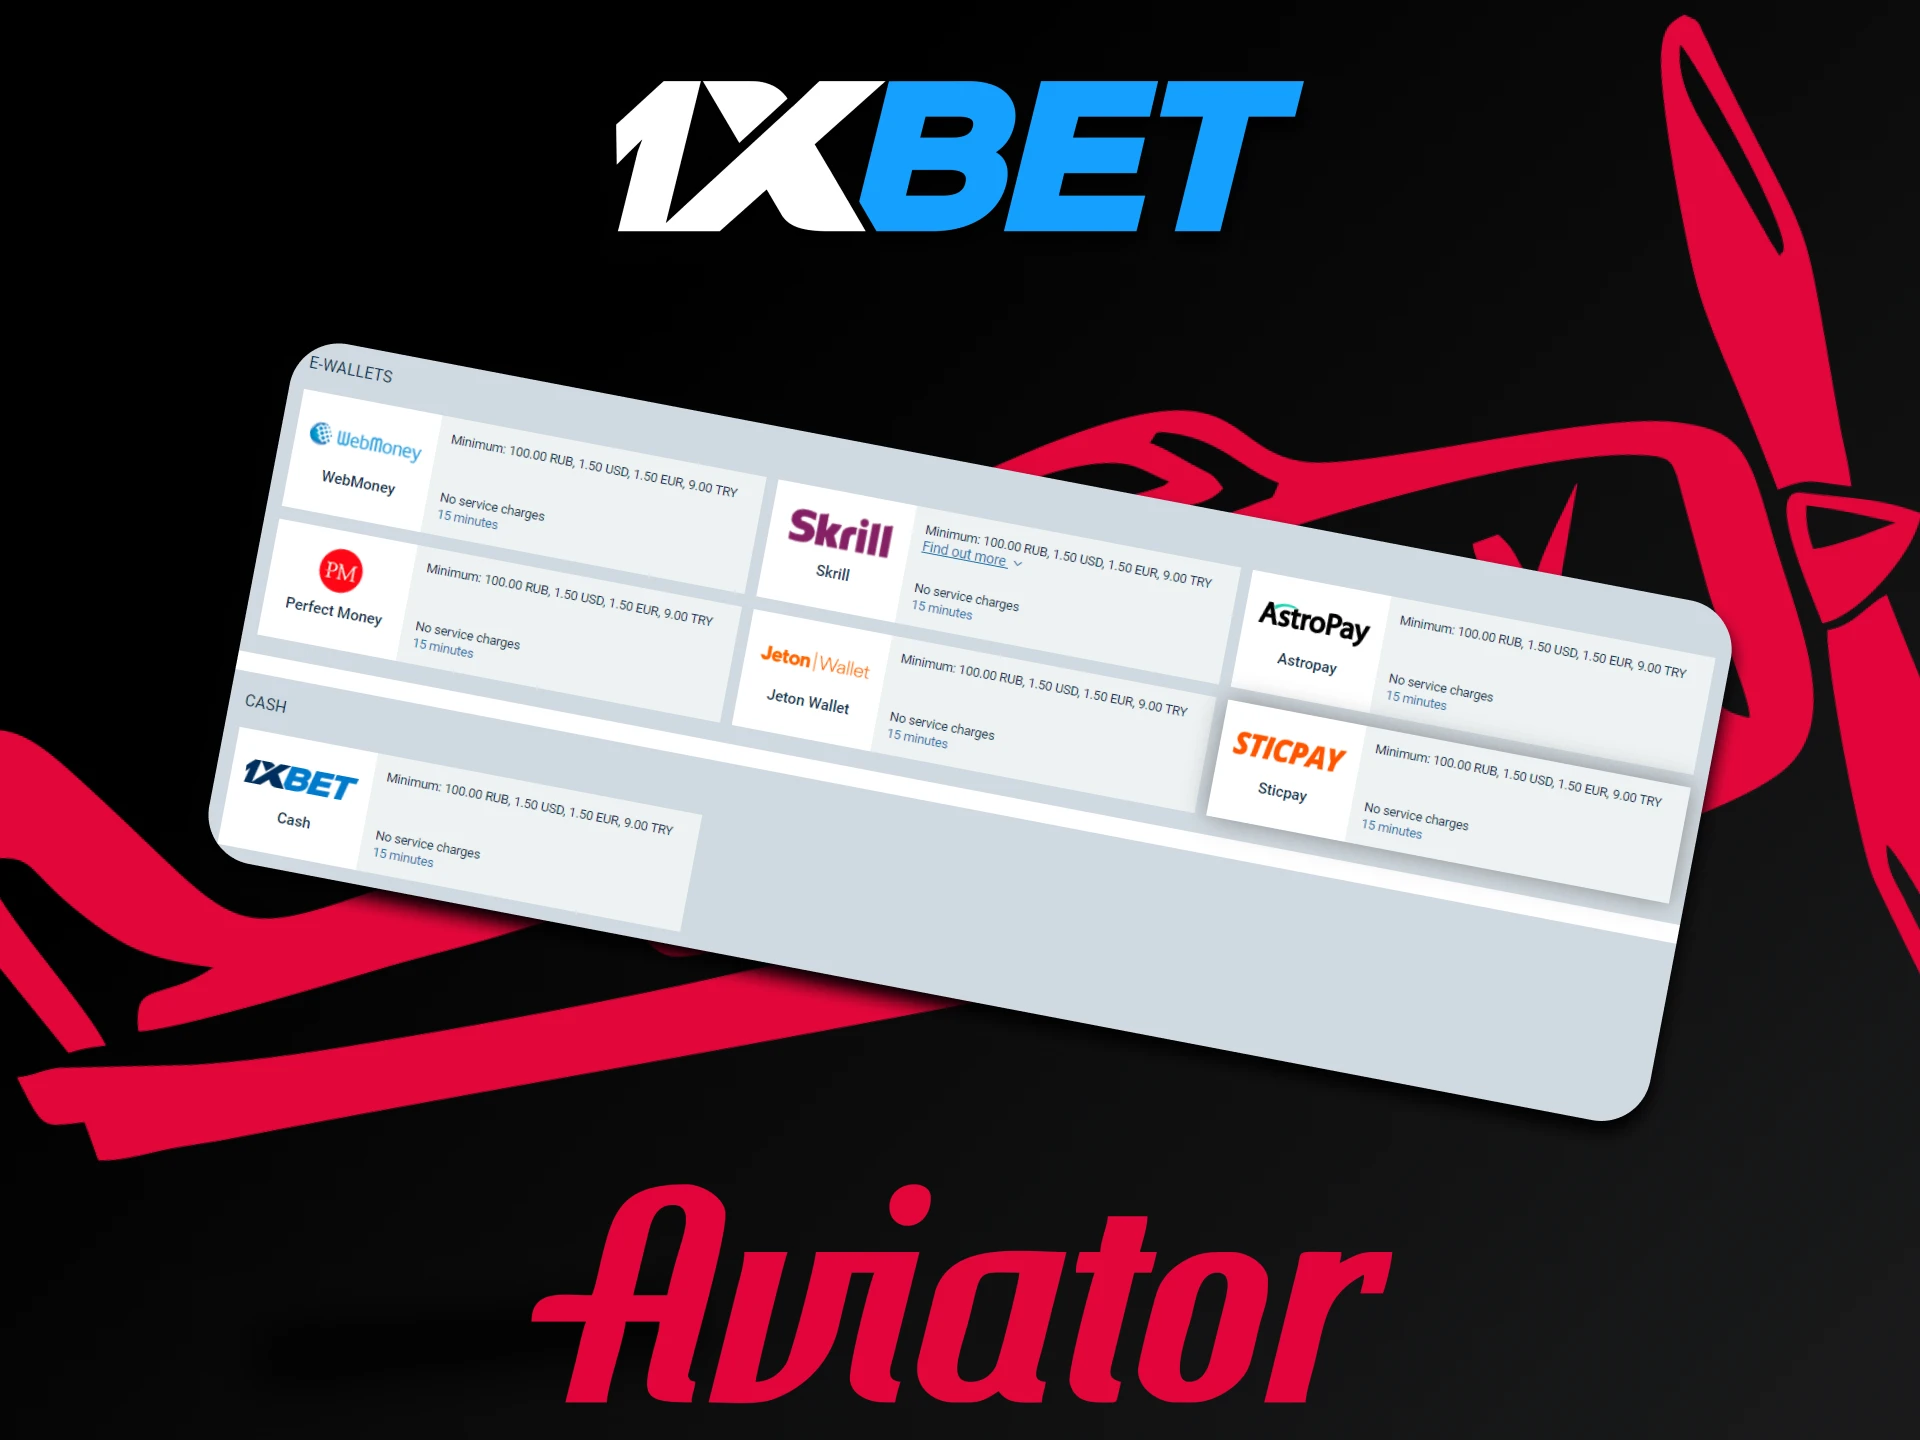 We will tell you how you can withdraw your funds from 1xbet for the Aviator game.